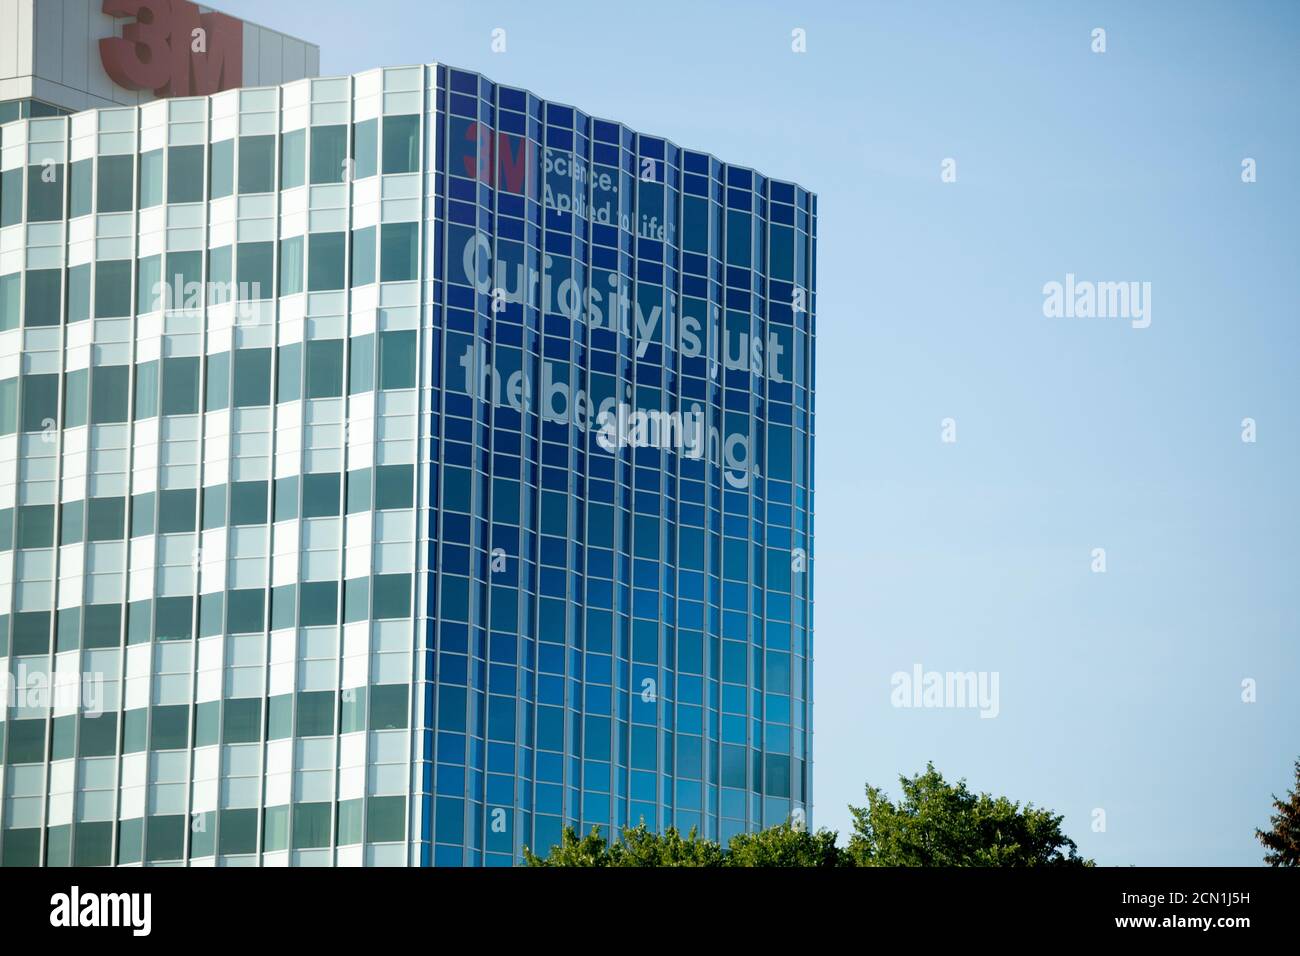 3M office building with a saying stating on the building 'Curiosity is Just the Beginning'. St Paul Minnesota MN USA Stock Photo